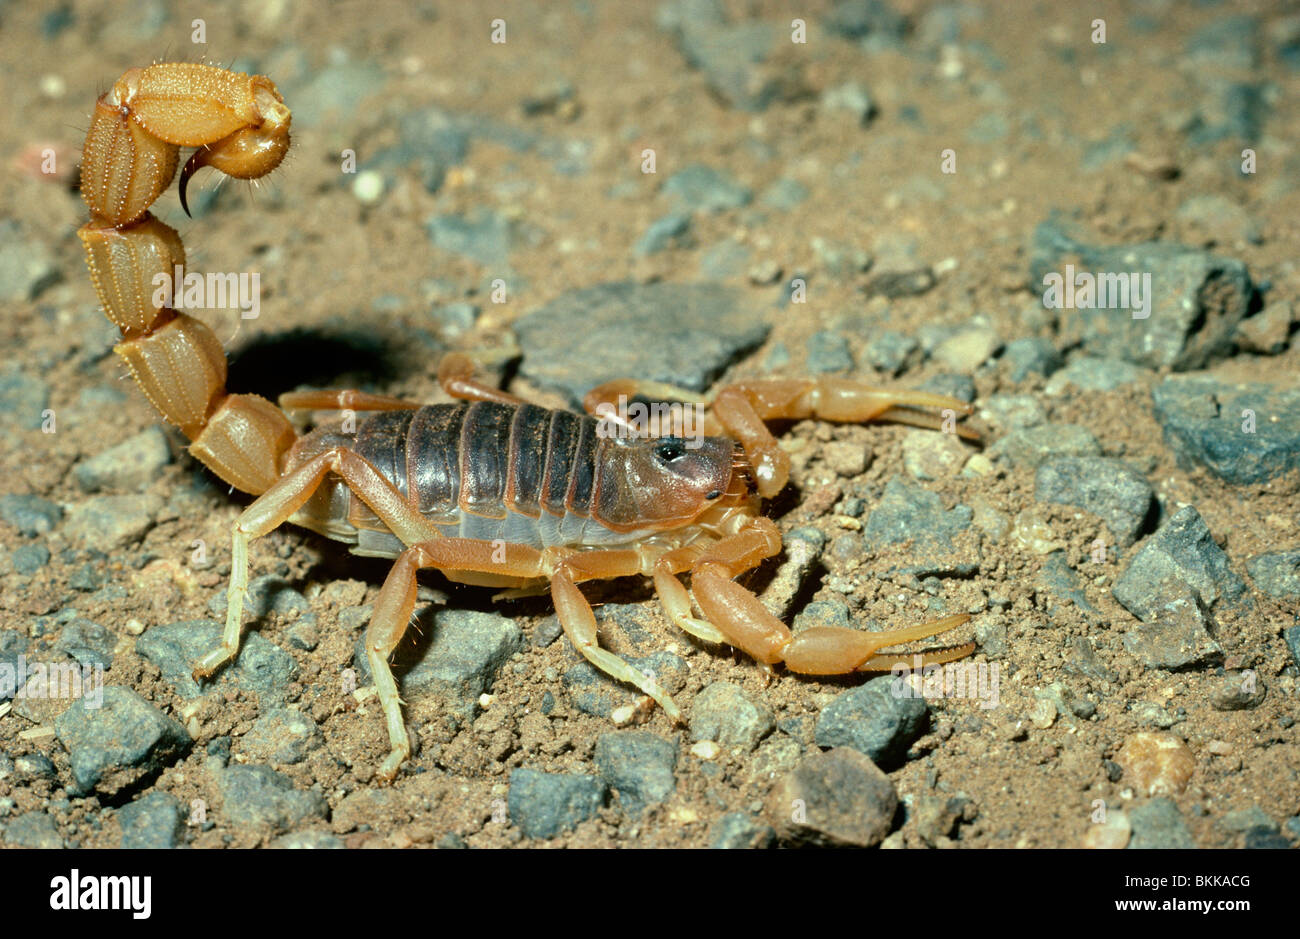 Cape thick-tailed scorpion (Parabuthus capensis: Buthidae) in savannah South Africa Stock Photo